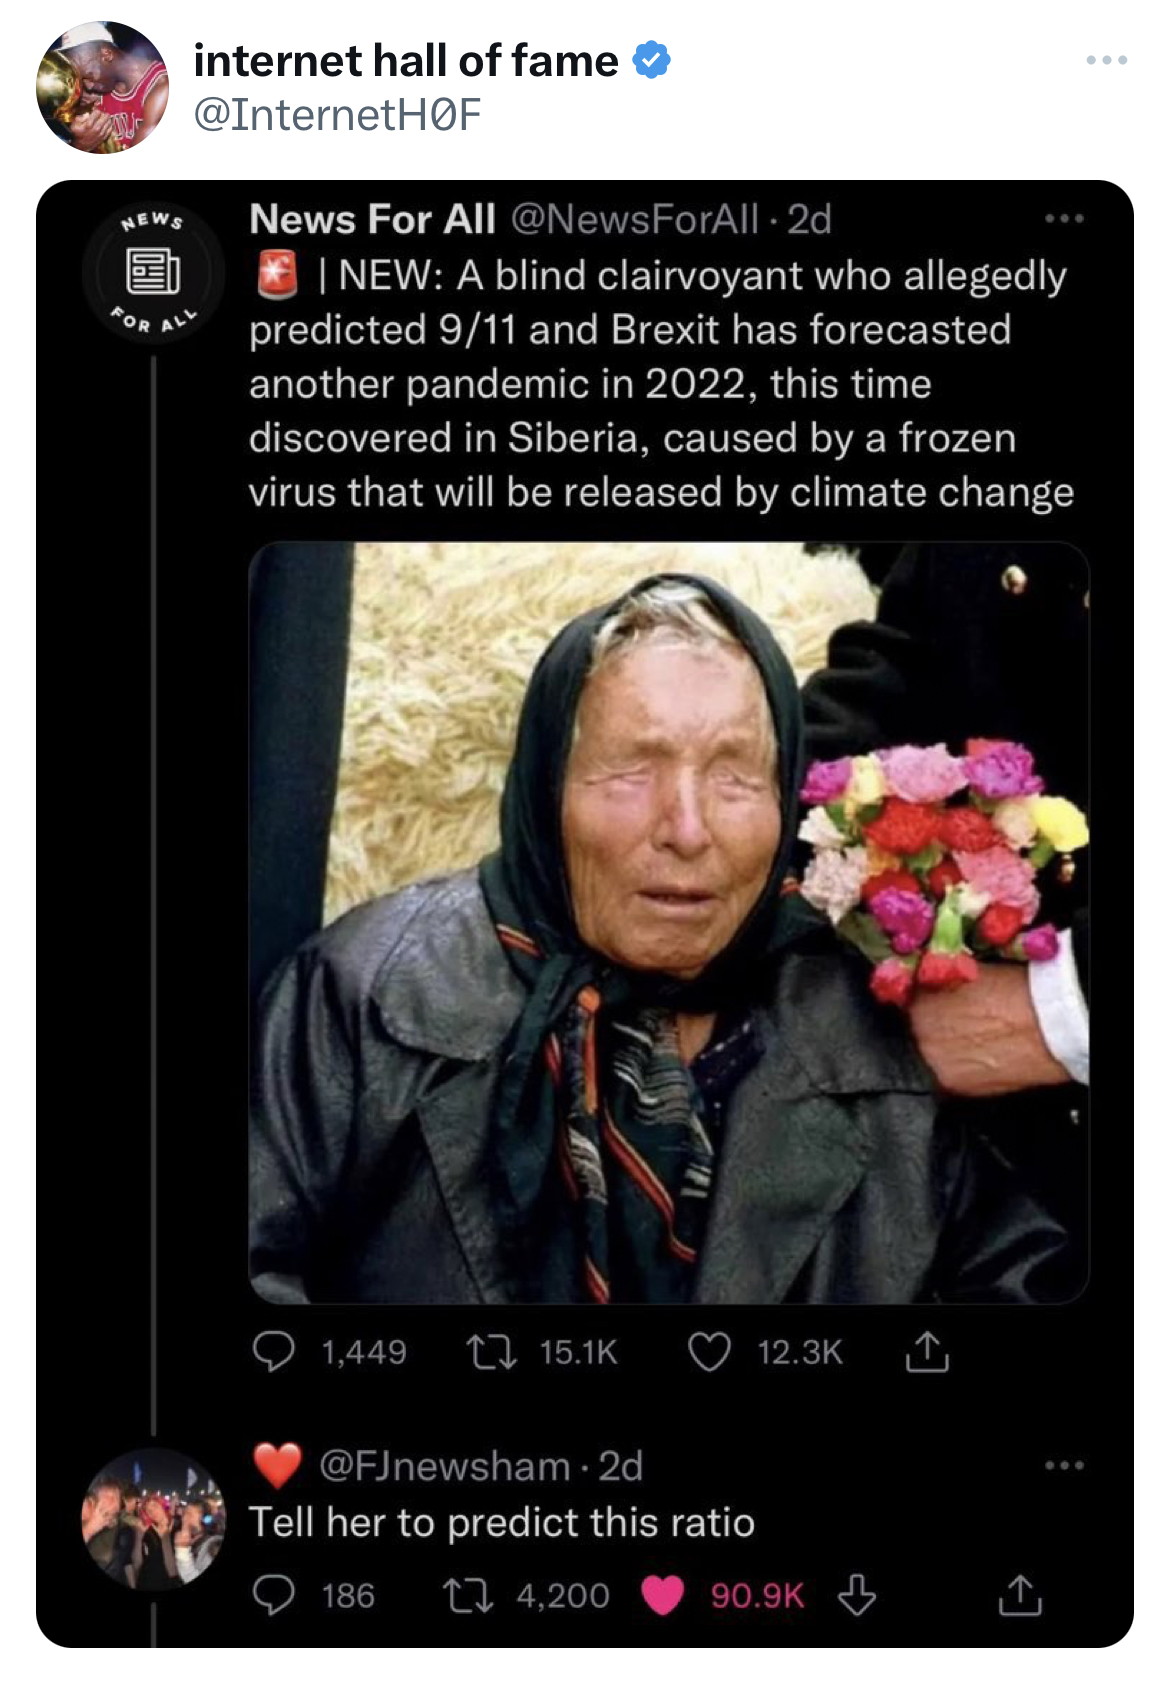 savage tweets - predict this ratio twitter - internet hall of fame News For All I New A blind clairvoyant who allegedly predicted 911 and Brexit has forecasted another pandemic in 2022, this time discovered in Siberia, caused by a frozen virus that will b